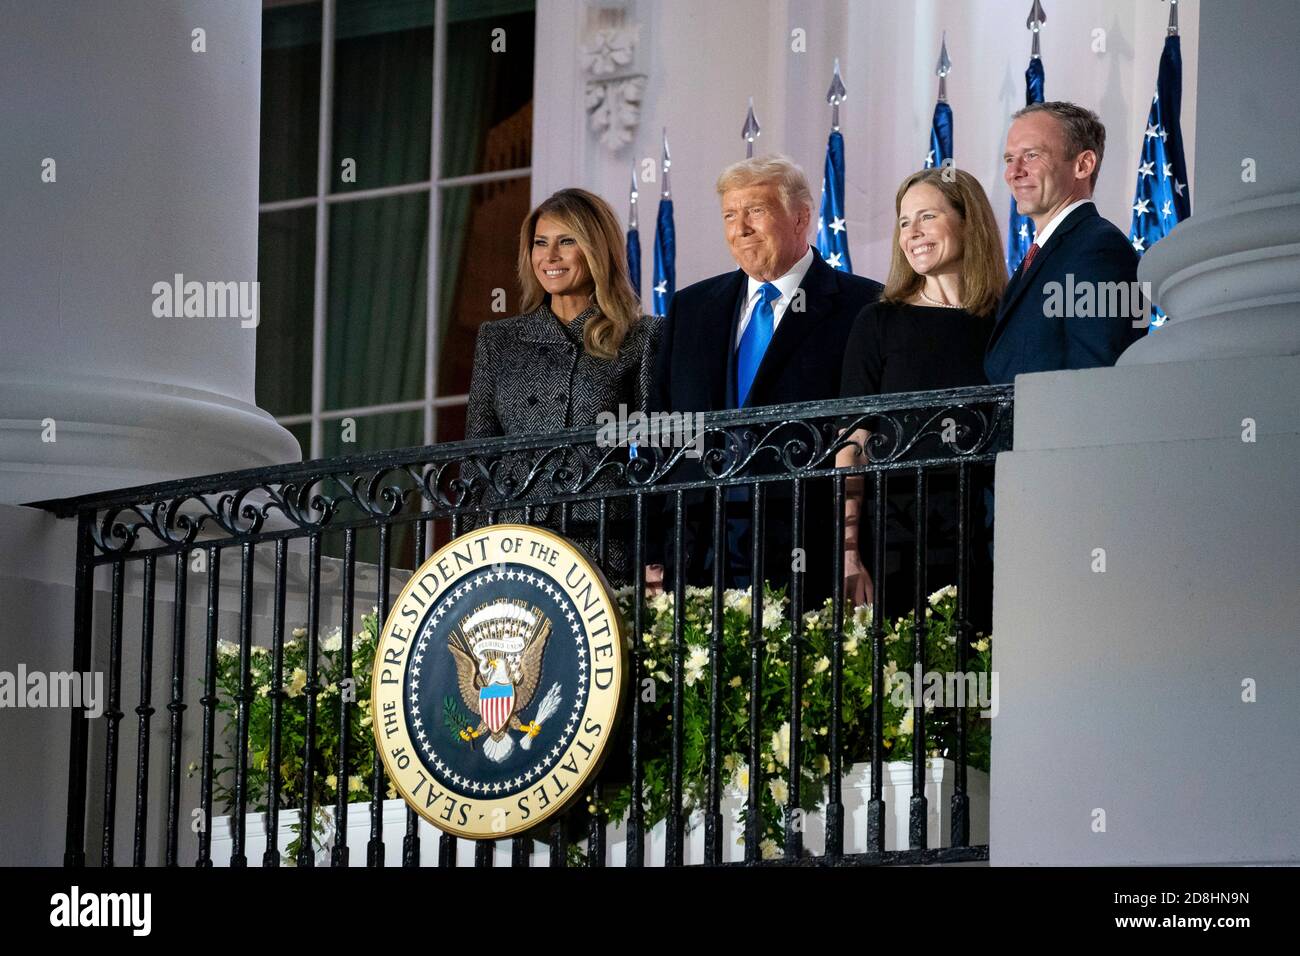 U.S President Donald Trump, First Lady Melania Trump, Supreme Court Associate Justice Amy Coney Barrett, and her husband Jesse Barrett greet invited guests from the Blue Room Balcony of the White House October 26, 2020 in Washington, DC. Stock Photo